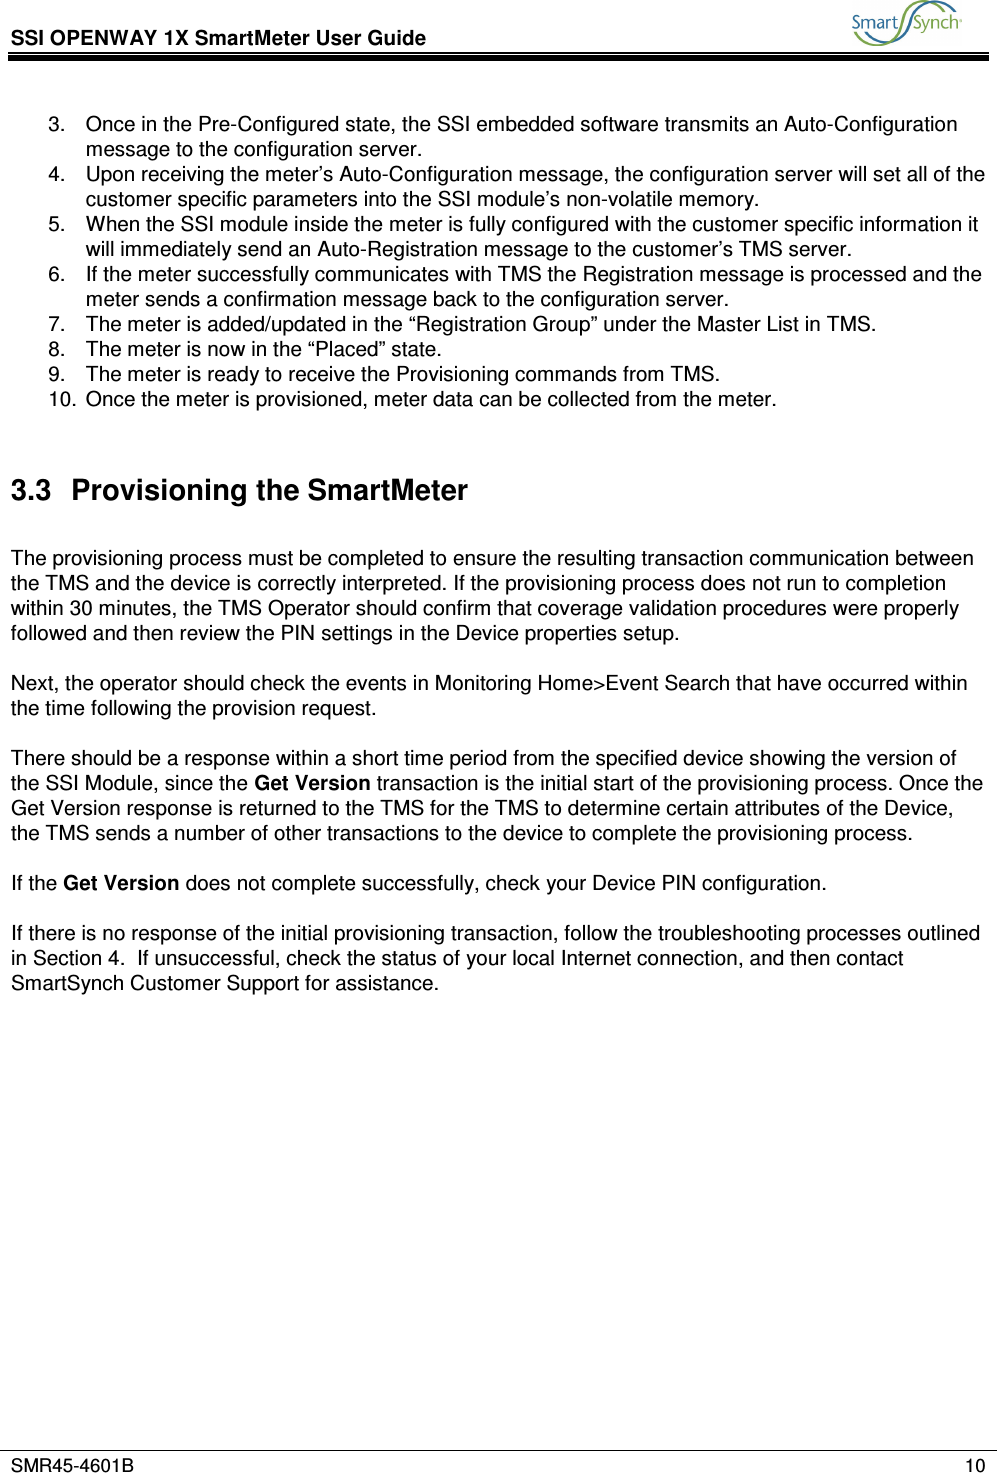 SSI OPENWAY 1X SmartMeter User Guide           SMR45-4601B    10  3.  Once in the Pre-Configured state, the SSI embedded software transmits an Auto-Configuration message to the configuration server. 4.  Upon receiving the meter’s Auto-Configuration message, the configuration server will set all of the customer specific parameters into the SSI module’s non-volatile memory. 5.  When the SSI module inside the meter is fully configured with the customer specific information it will immediately send an Auto-Registration message to the customer’s TMS server. 6.  If the meter successfully communicates with TMS the Registration message is processed and the meter sends a confirmation message back to the configuration server. 7.  The meter is added/updated in the “Registration Group” under the Master List in TMS. 8.  The meter is now in the “Placed” state. 9.  The meter is ready to receive the Provisioning commands from TMS. 10.  Once the meter is provisioned, meter data can be collected from the meter.  3.3  Provisioning the SmartMeter  The provisioning process must be completed to ensure the resulting transaction communication between the TMS and the device is correctly interpreted. If the provisioning process does not run to completion within 30 minutes, the TMS Operator should confirm that coverage validation procedures were properly followed and then review the PIN settings in the Device properties setup.  Next, the operator should check the events in Monitoring Home&gt;Event Search that have occurred within the time following the provision request.   There should be a response within a short time period from the specified device showing the version of the SSI Module, since the Get Version transaction is the initial start of the provisioning process. Once the Get Version response is returned to the TMS for the TMS to determine certain attributes of the Device, the TMS sends a number of other transactions to the device to complete the provisioning process.  If the Get Version does not complete successfully, check your Device PIN configuration.  If there is no response of the initial provisioning transaction, follow the troubleshooting processes outlined in Section 4.  If unsuccessful, check the status of your local Internet connection, and then contact SmartSynch Customer Support for assistance. 